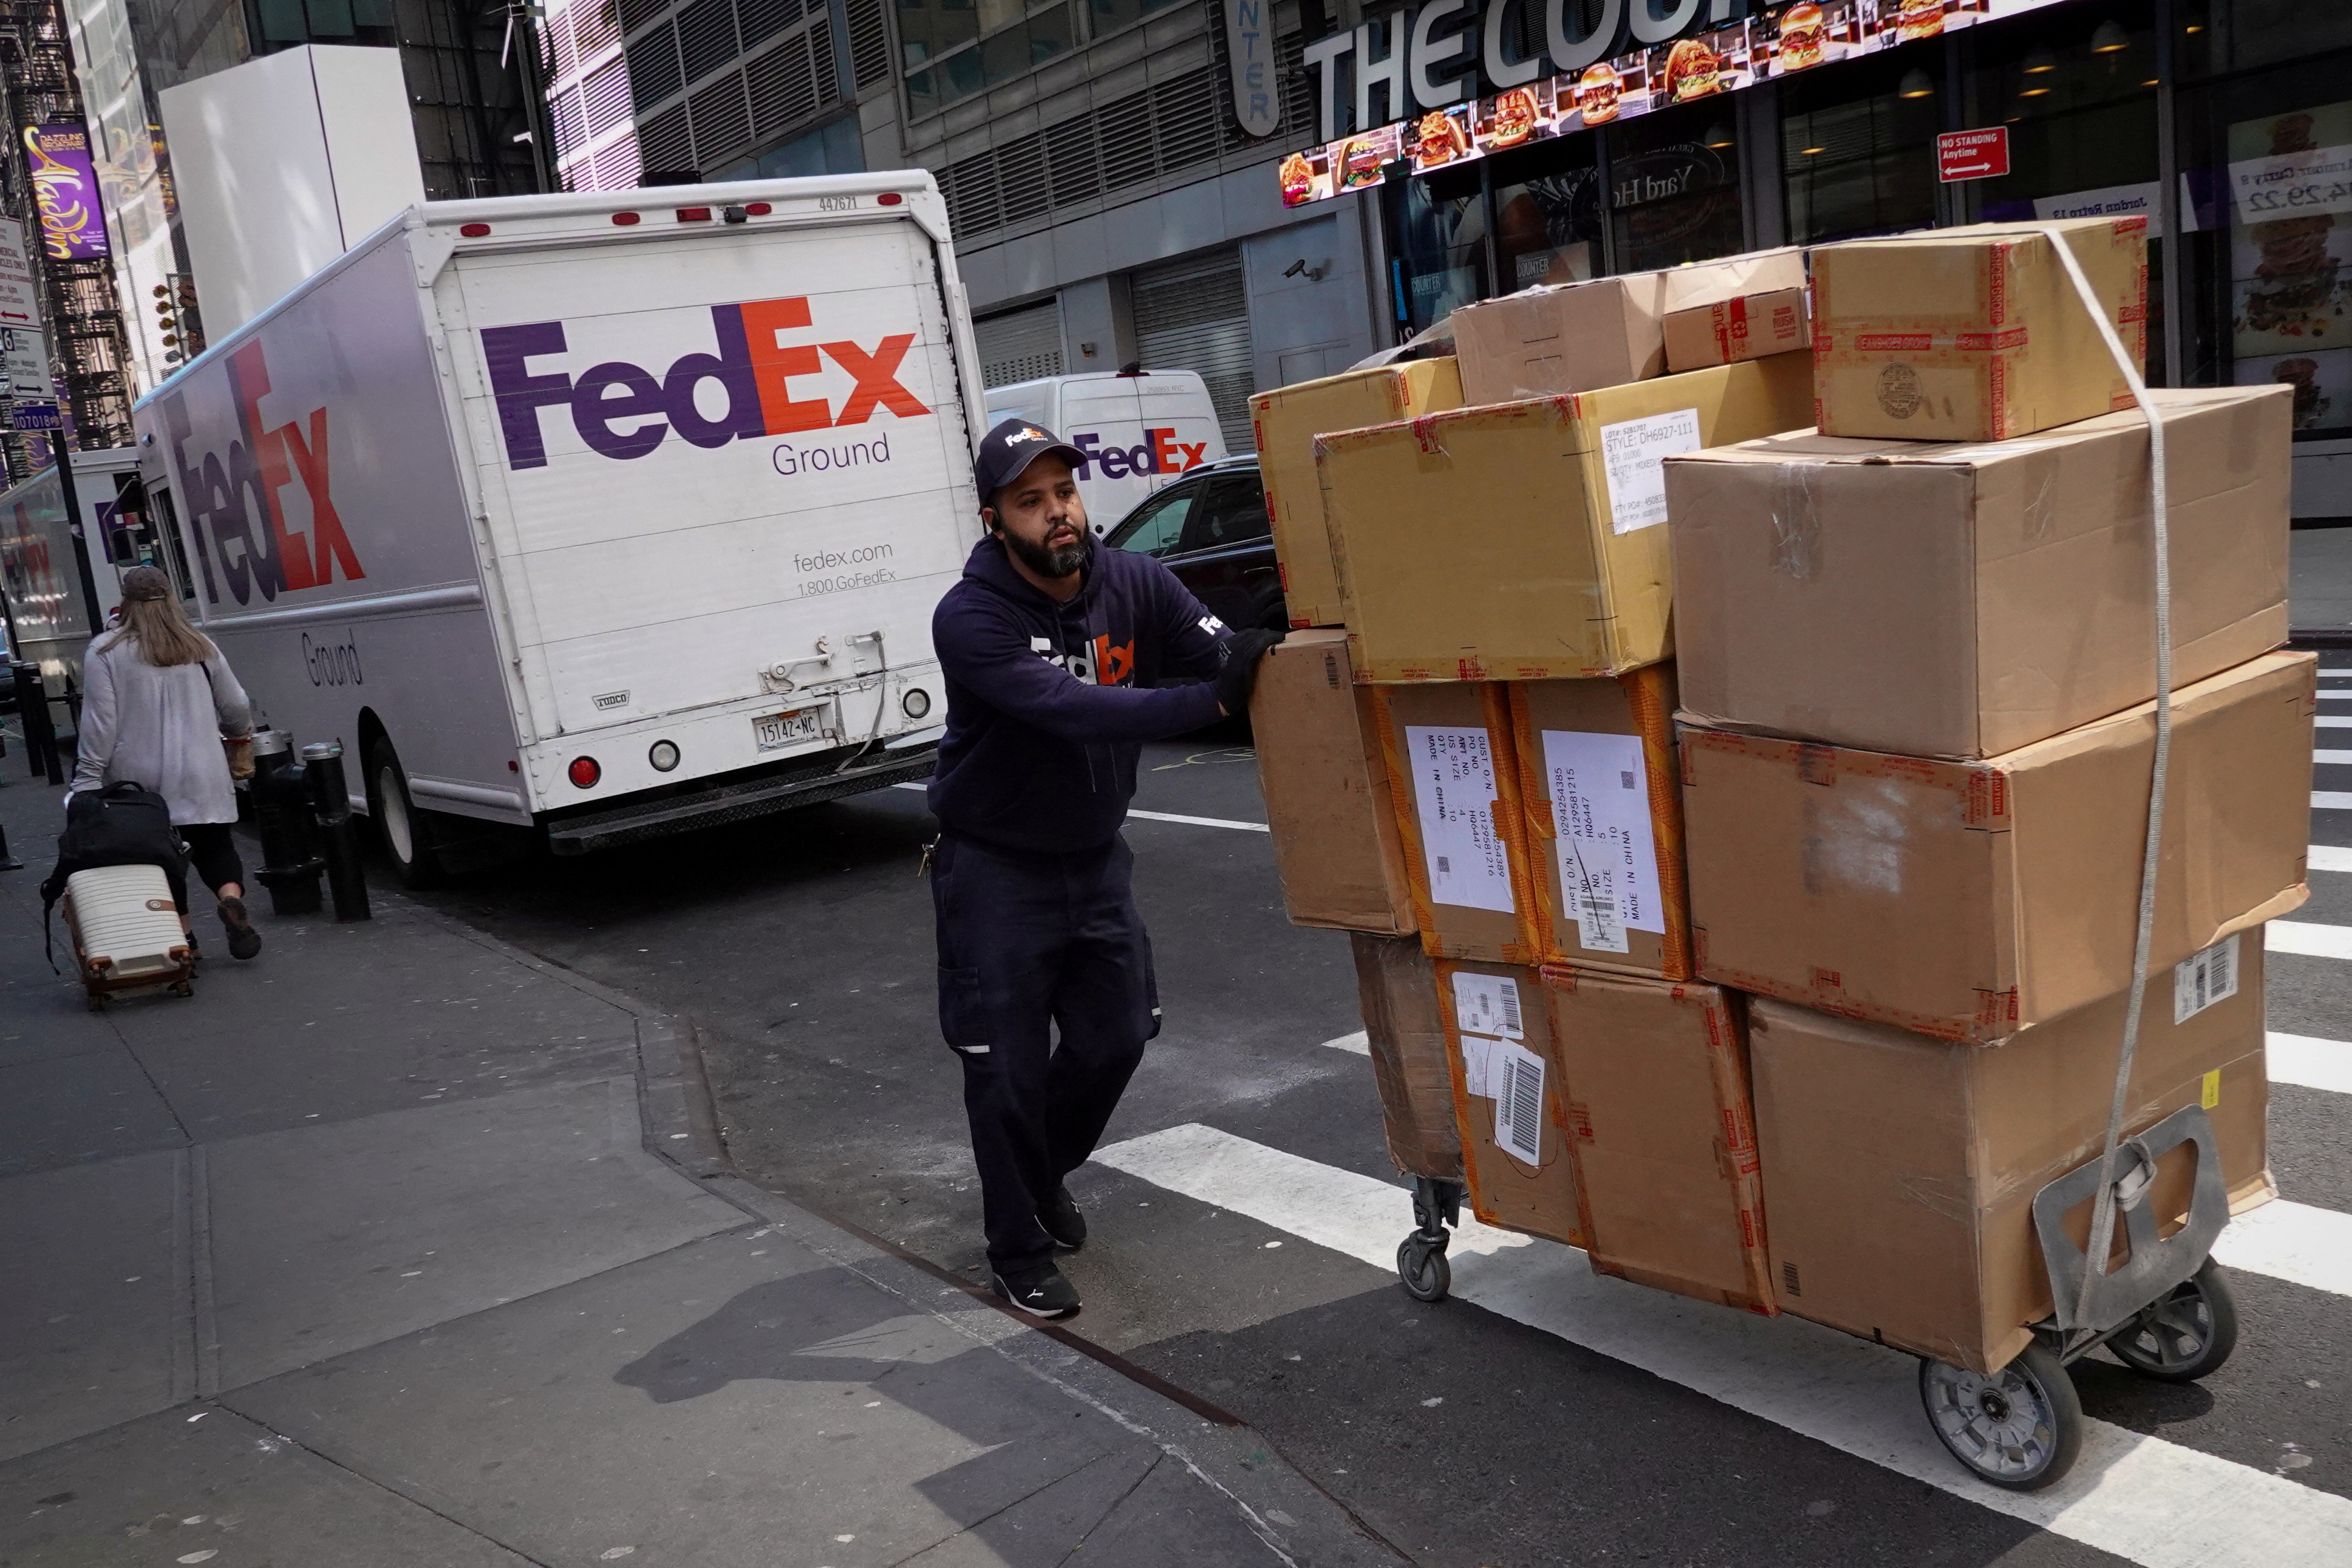 A FedEx worker delivers packages in Manhattan, New York City